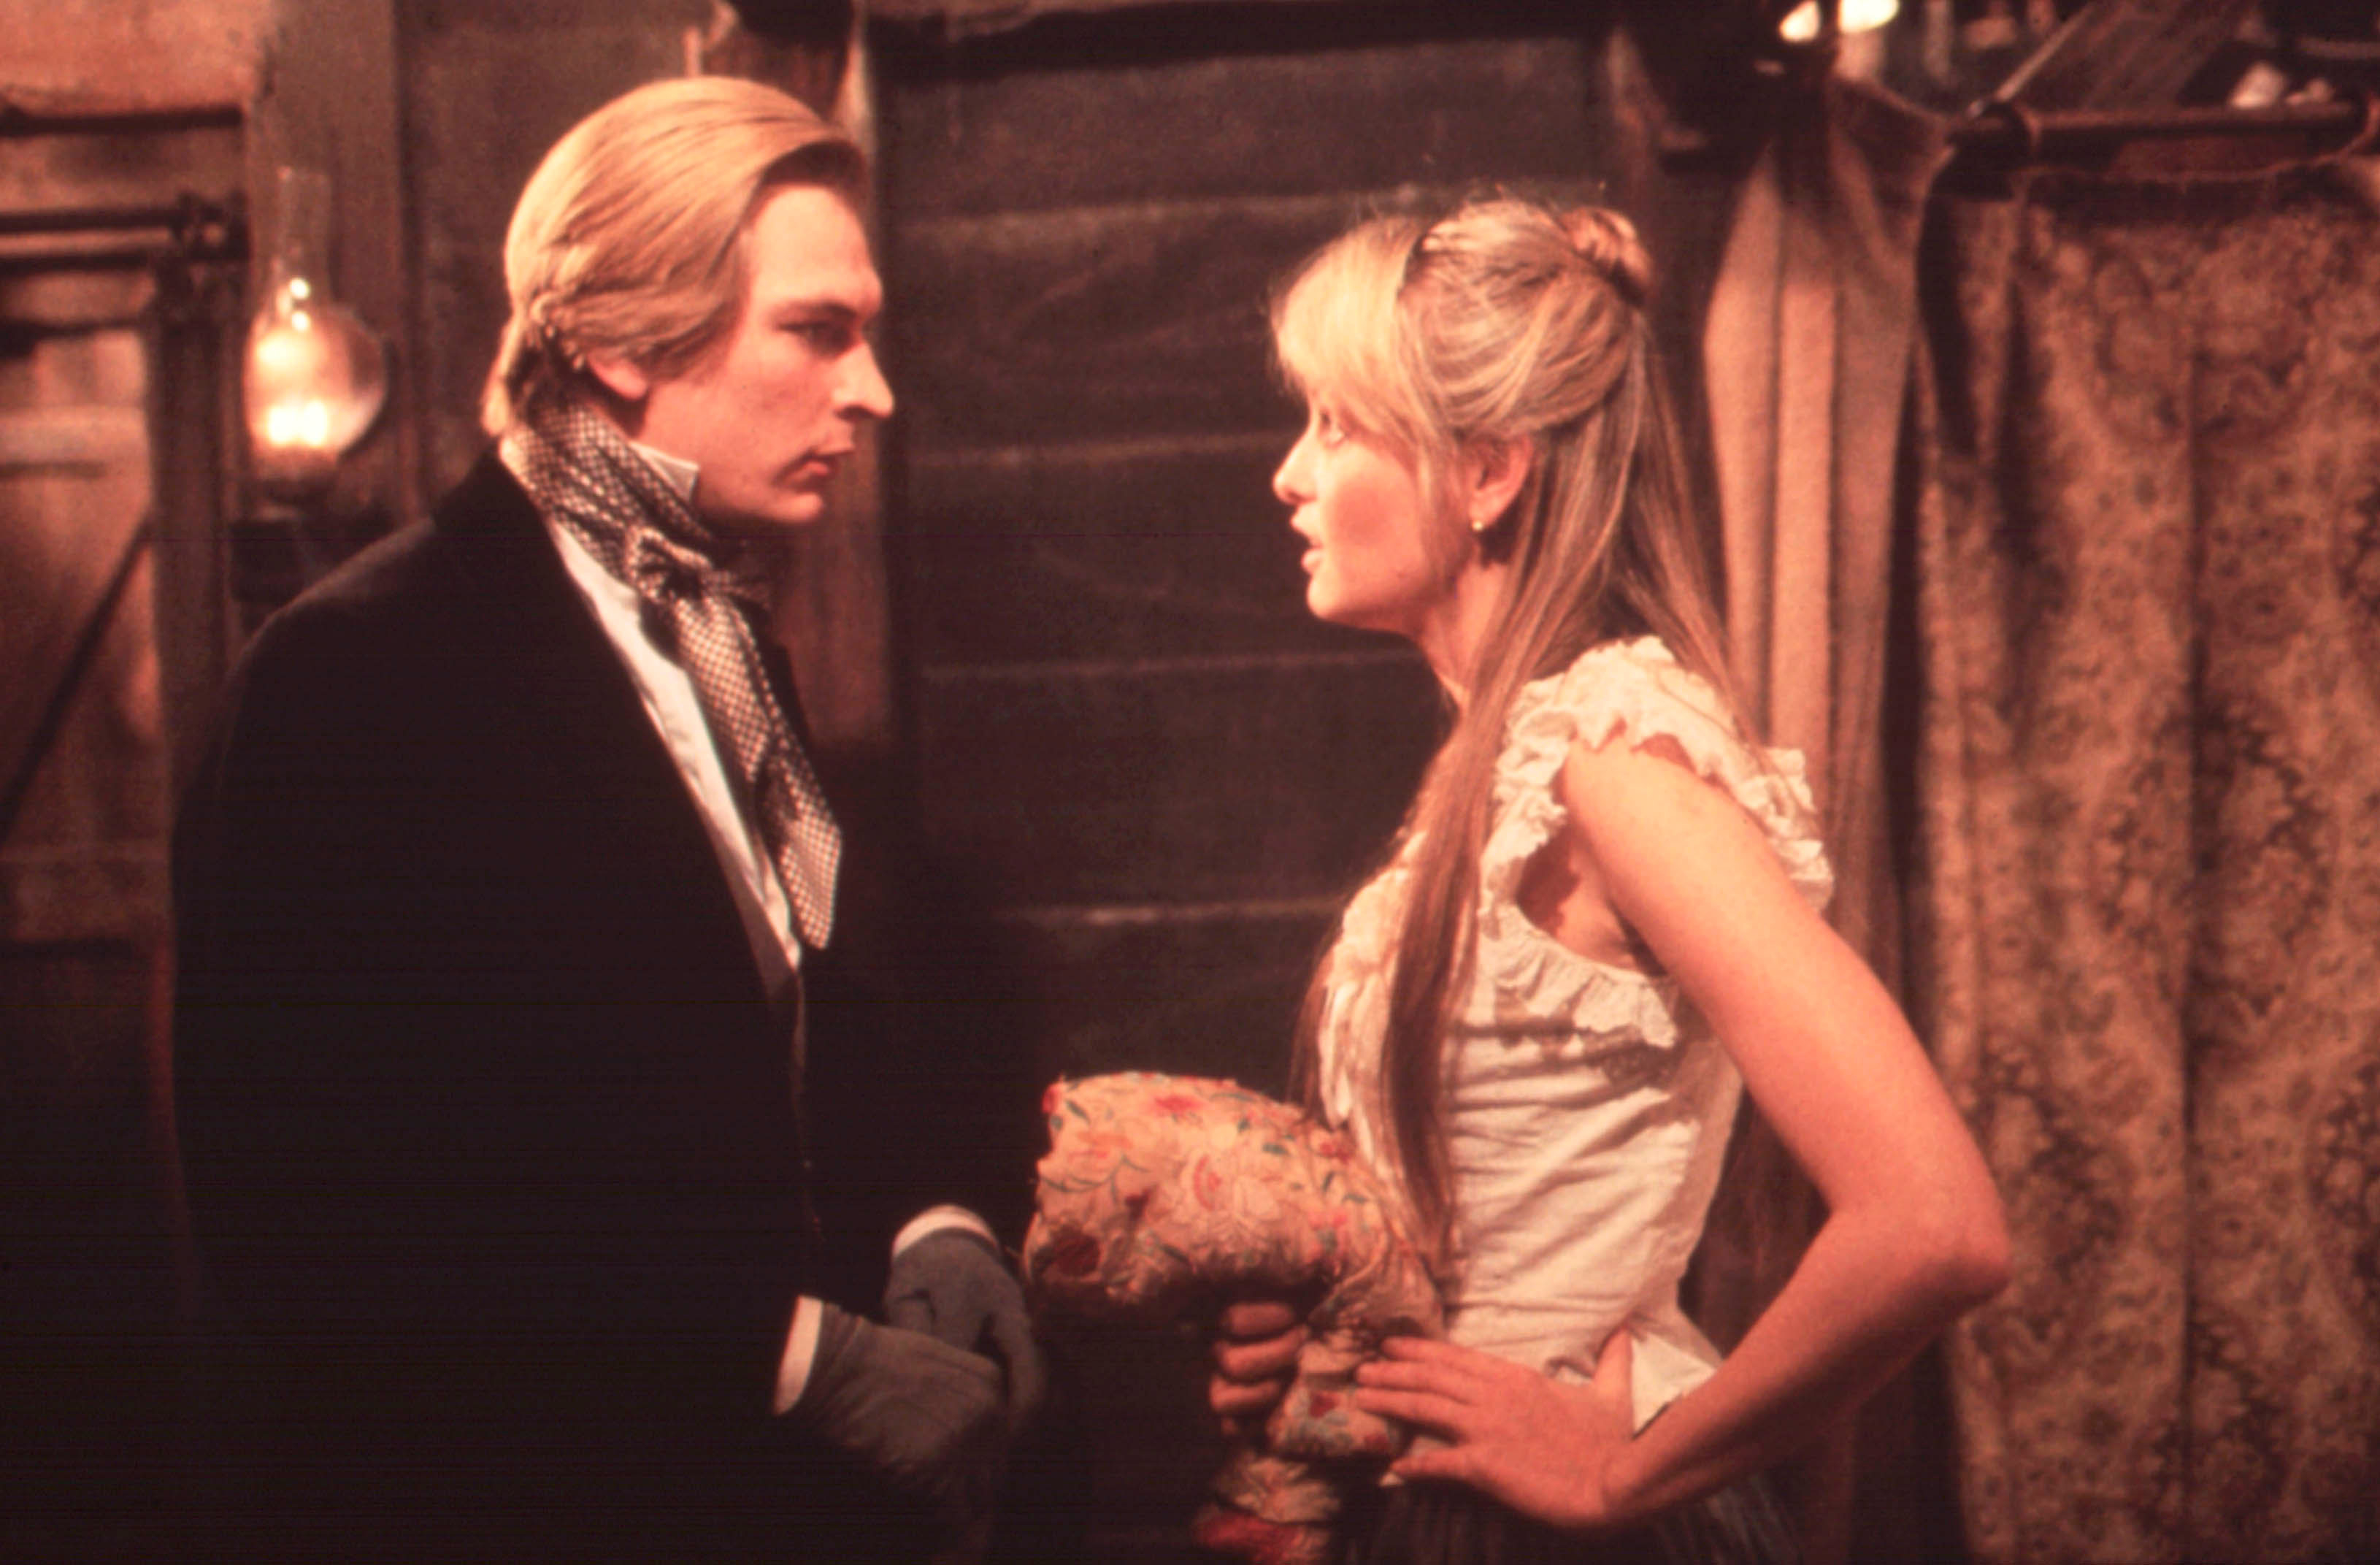 Julian Sands speaks to Twiggy Lawson in a late 1800s English home